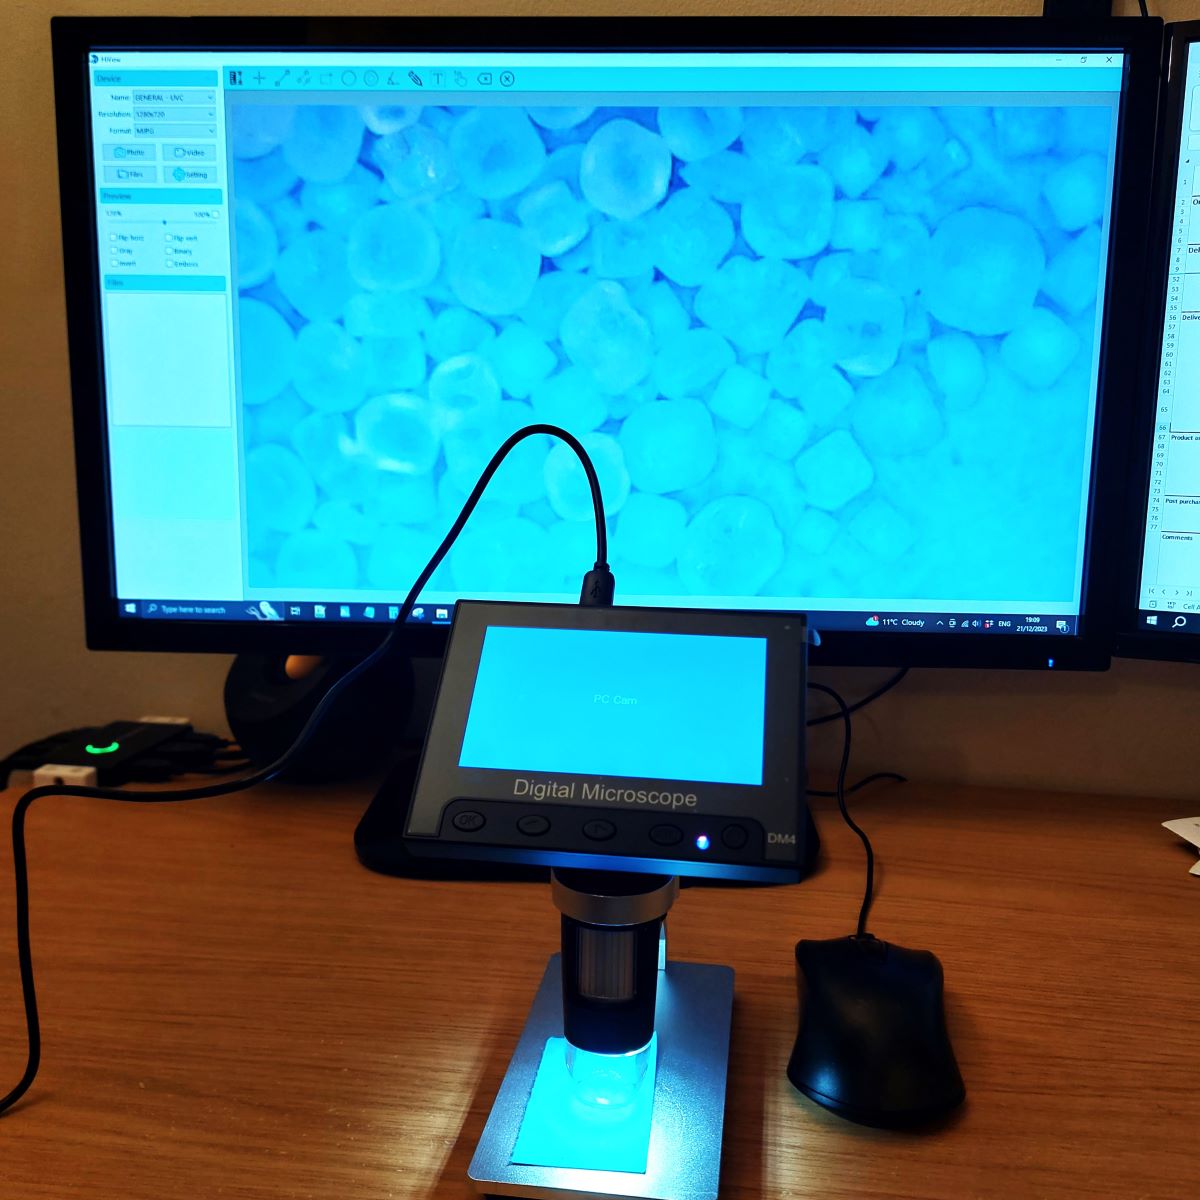 Digital microscope copnnected to computer